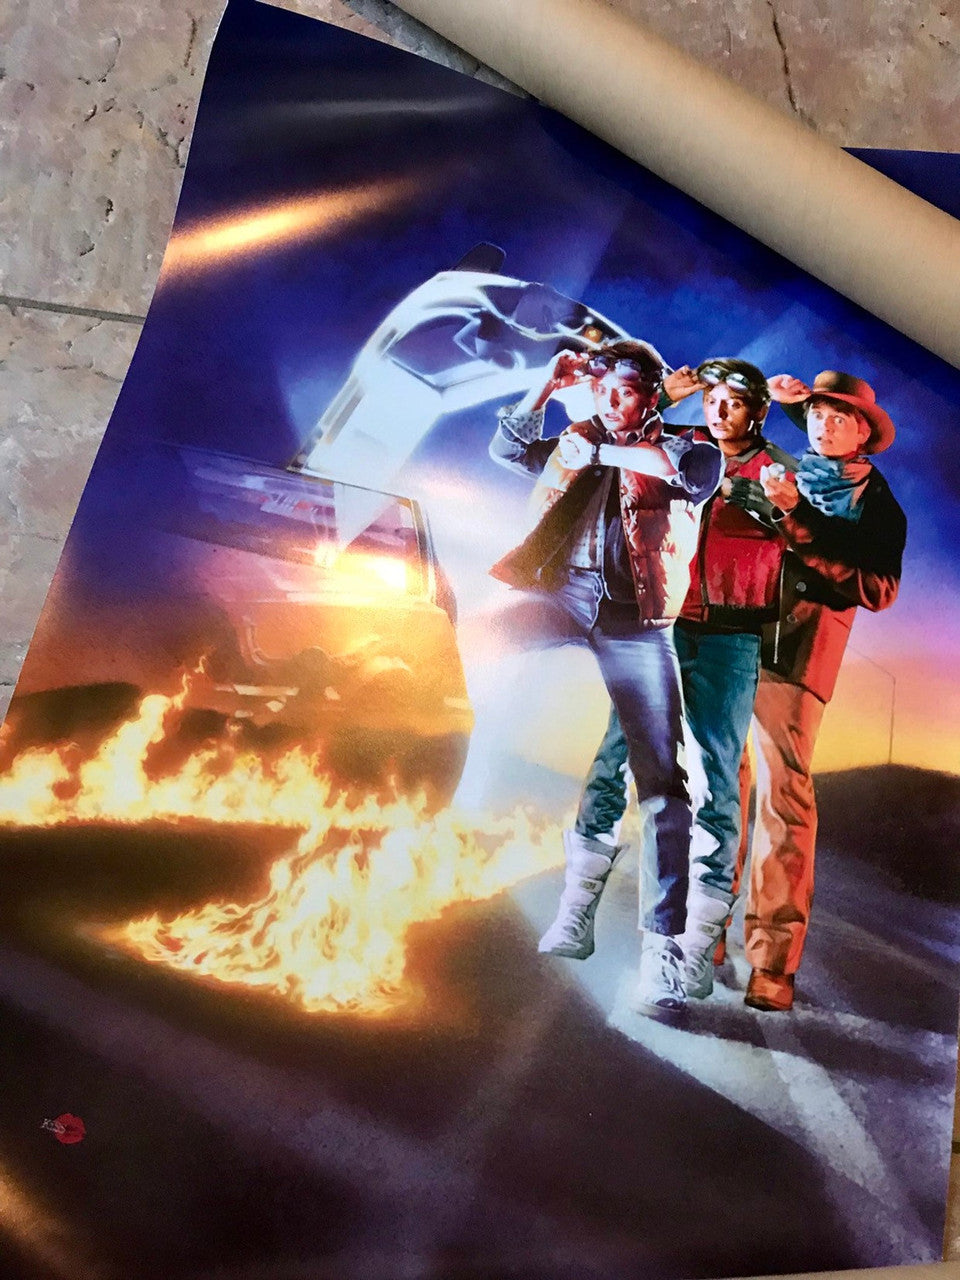 Back To The Future inspired KiSS Canvas - Trilogy Wall Art - Marty McFly 80s Delorean, Doc - Michael J Fox